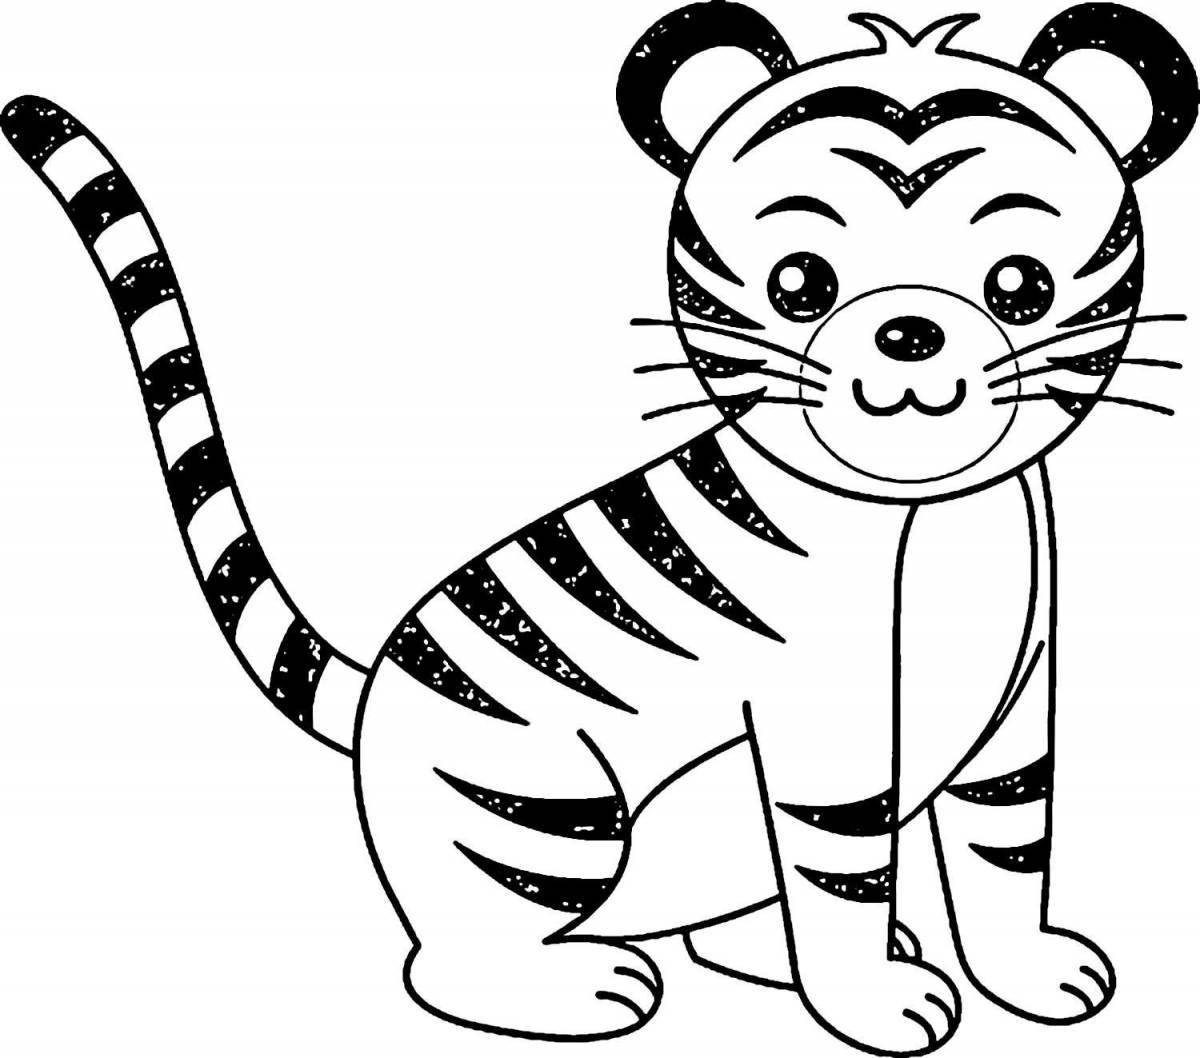 Exquisite tiger coloring book for kids